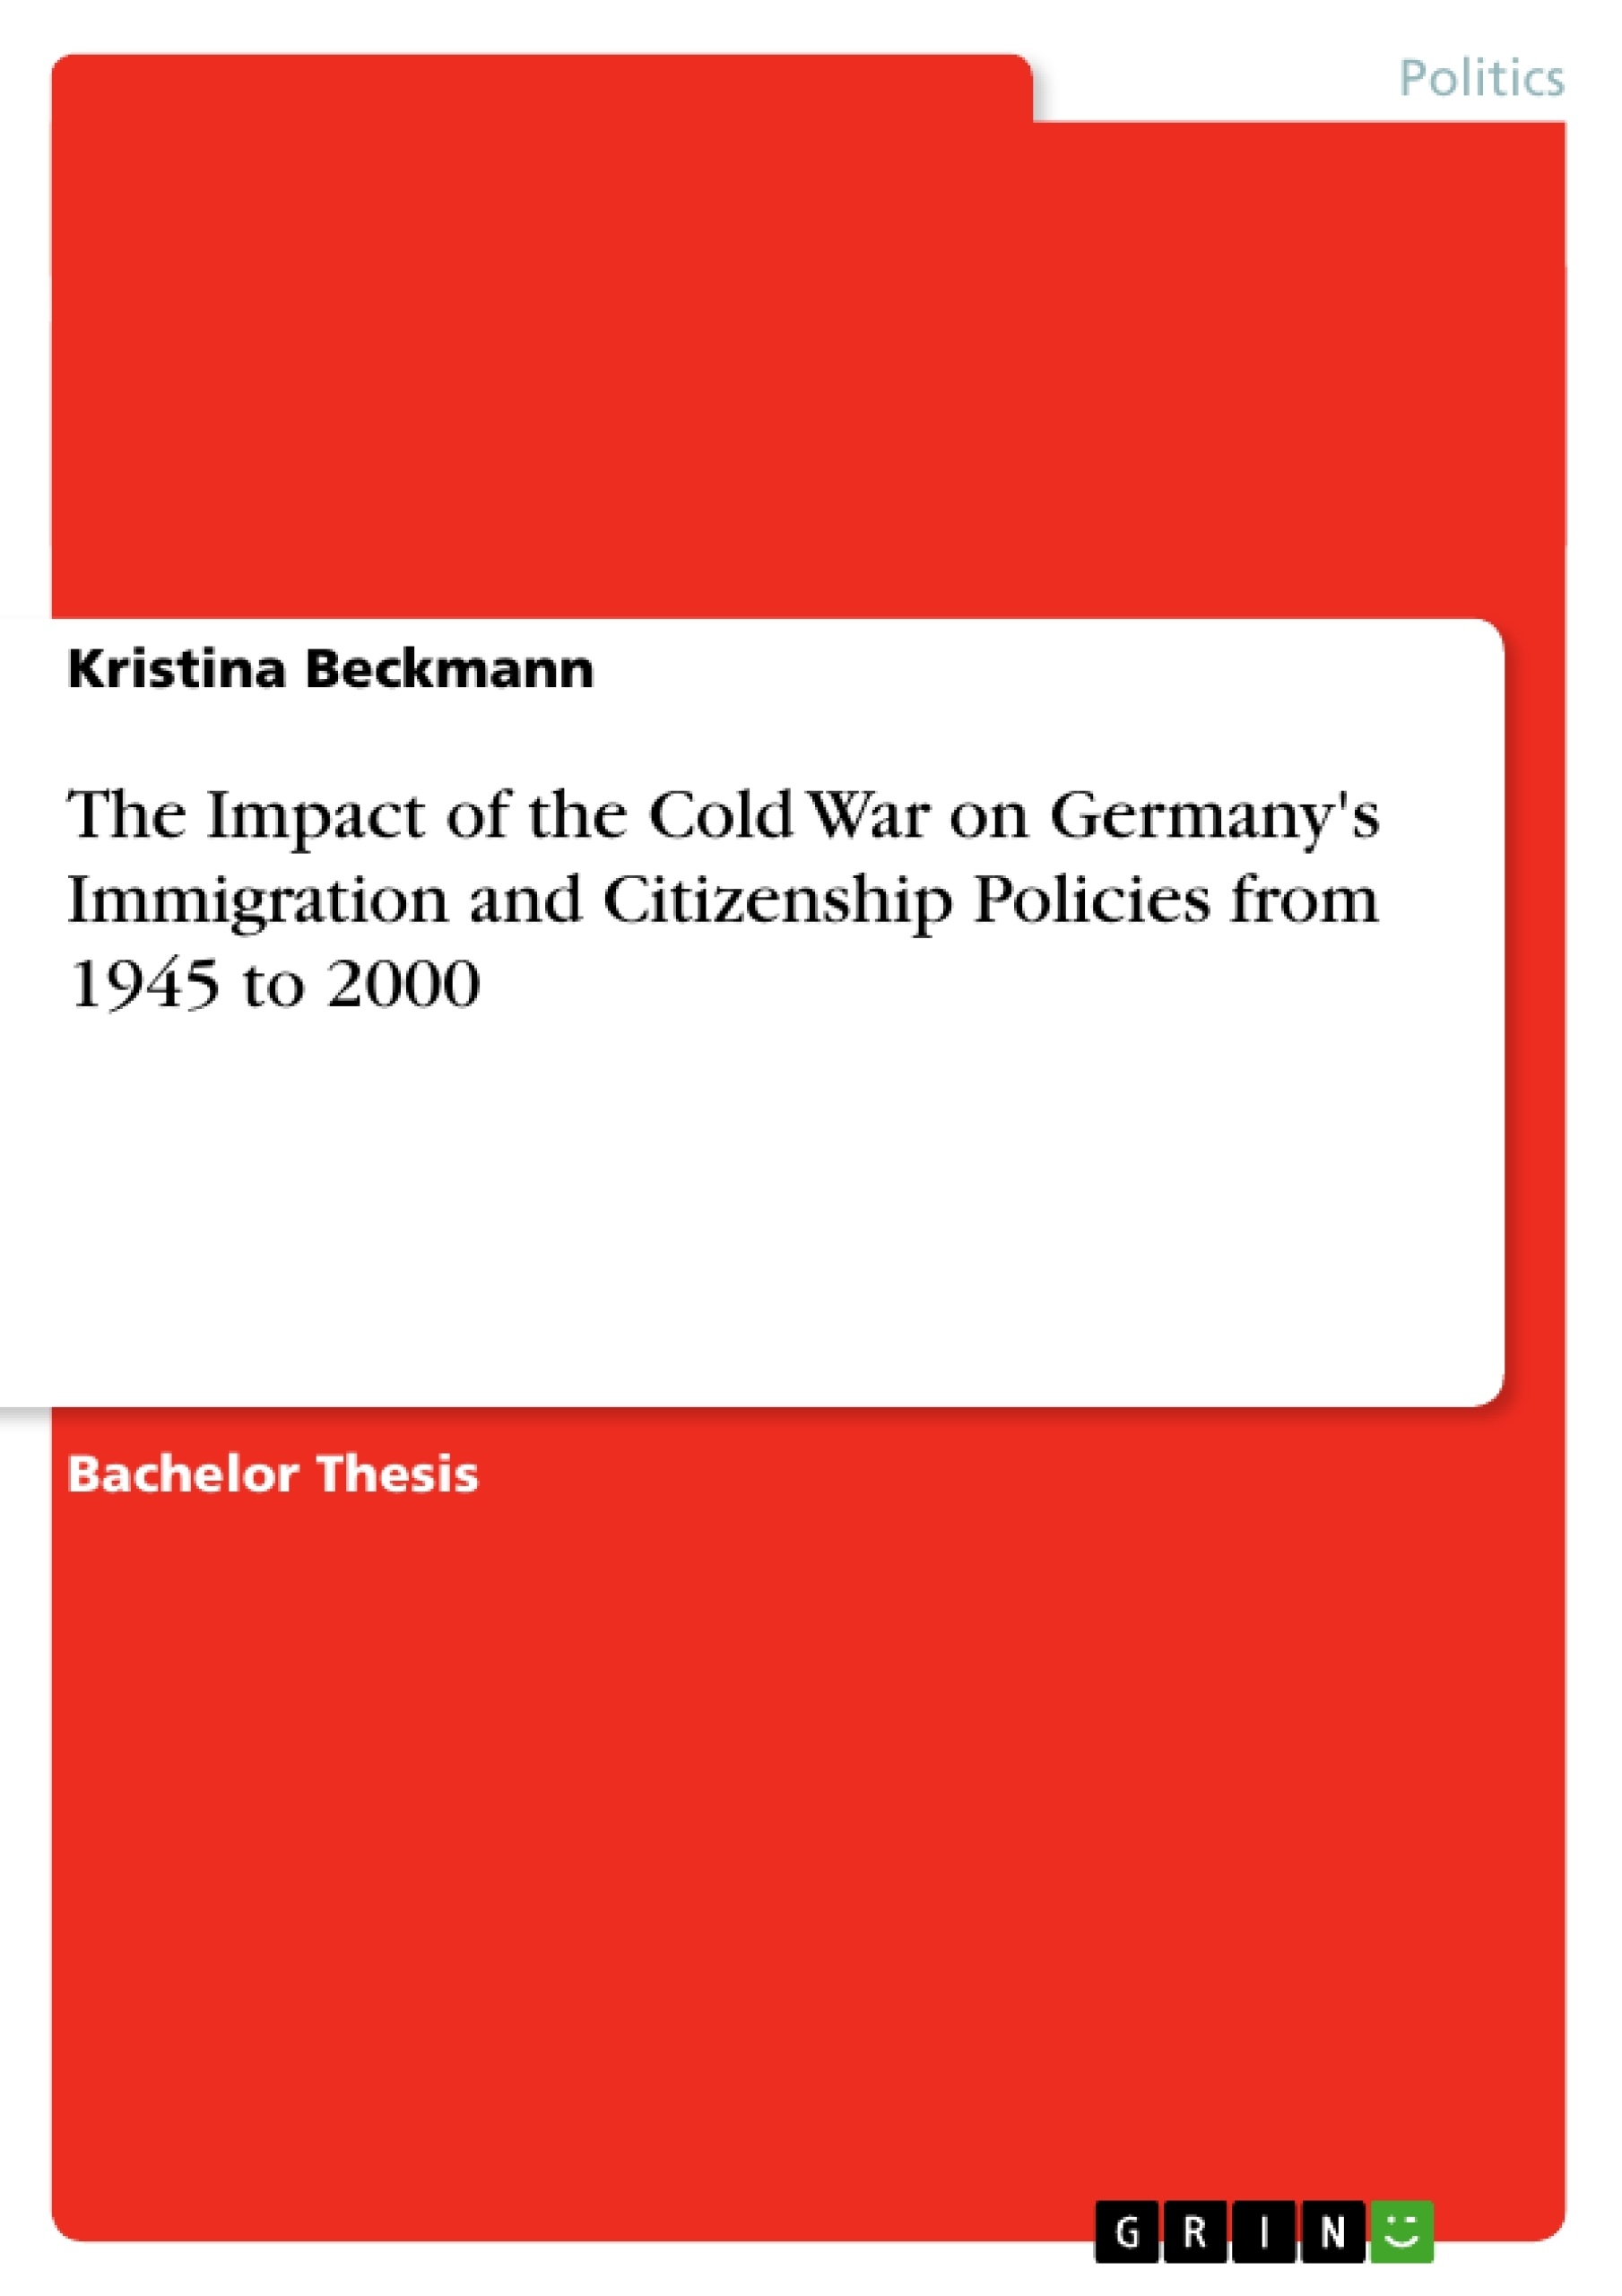 Title: The Impact of the Cold War on Germany's Immigration and Citizenship Policies from 1945 to 2000